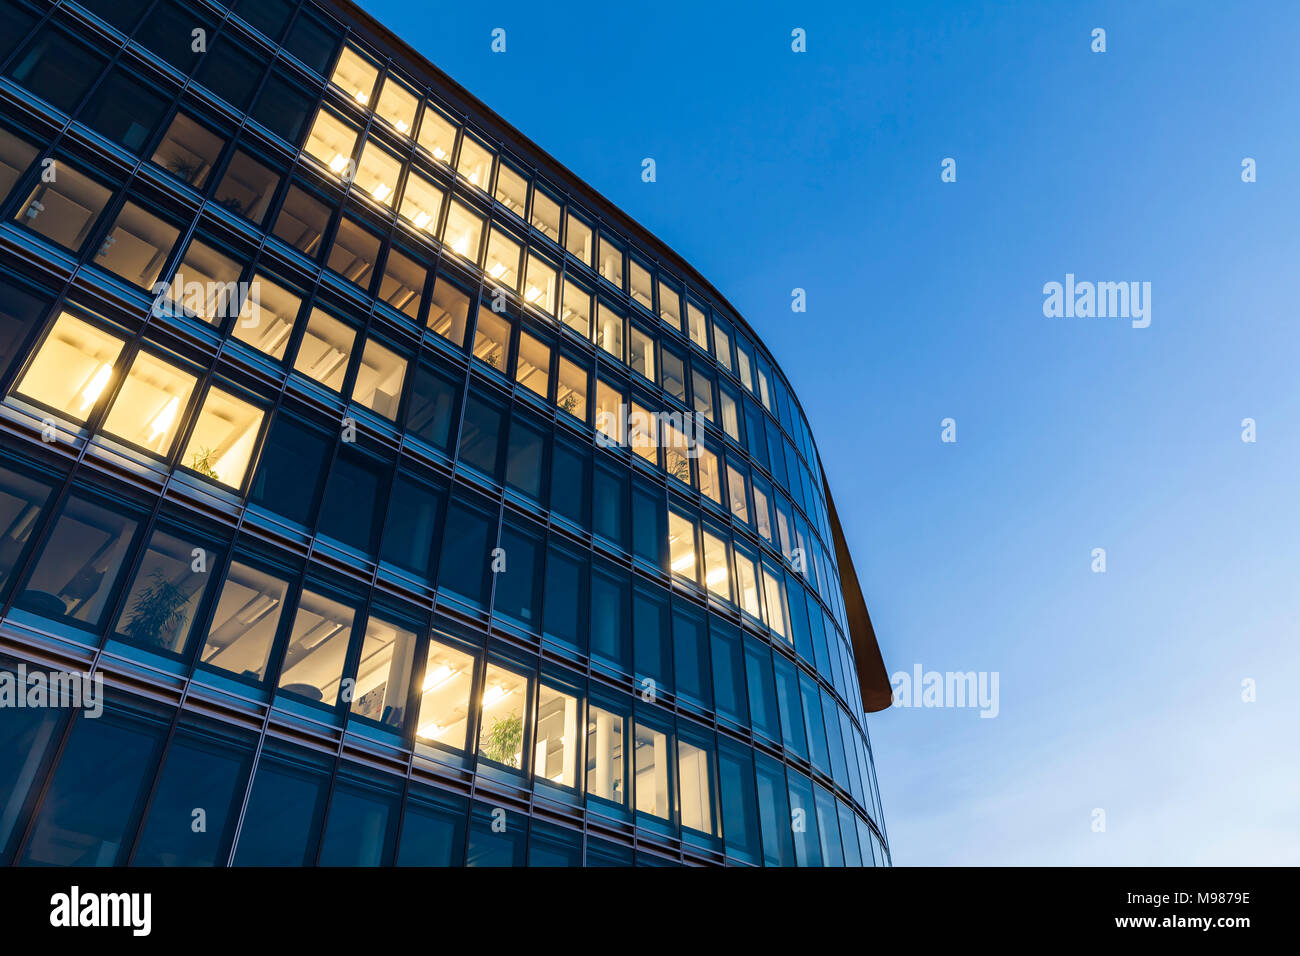 Allemagne, Bade-Wurtemberg, office building at night Banque D'Images